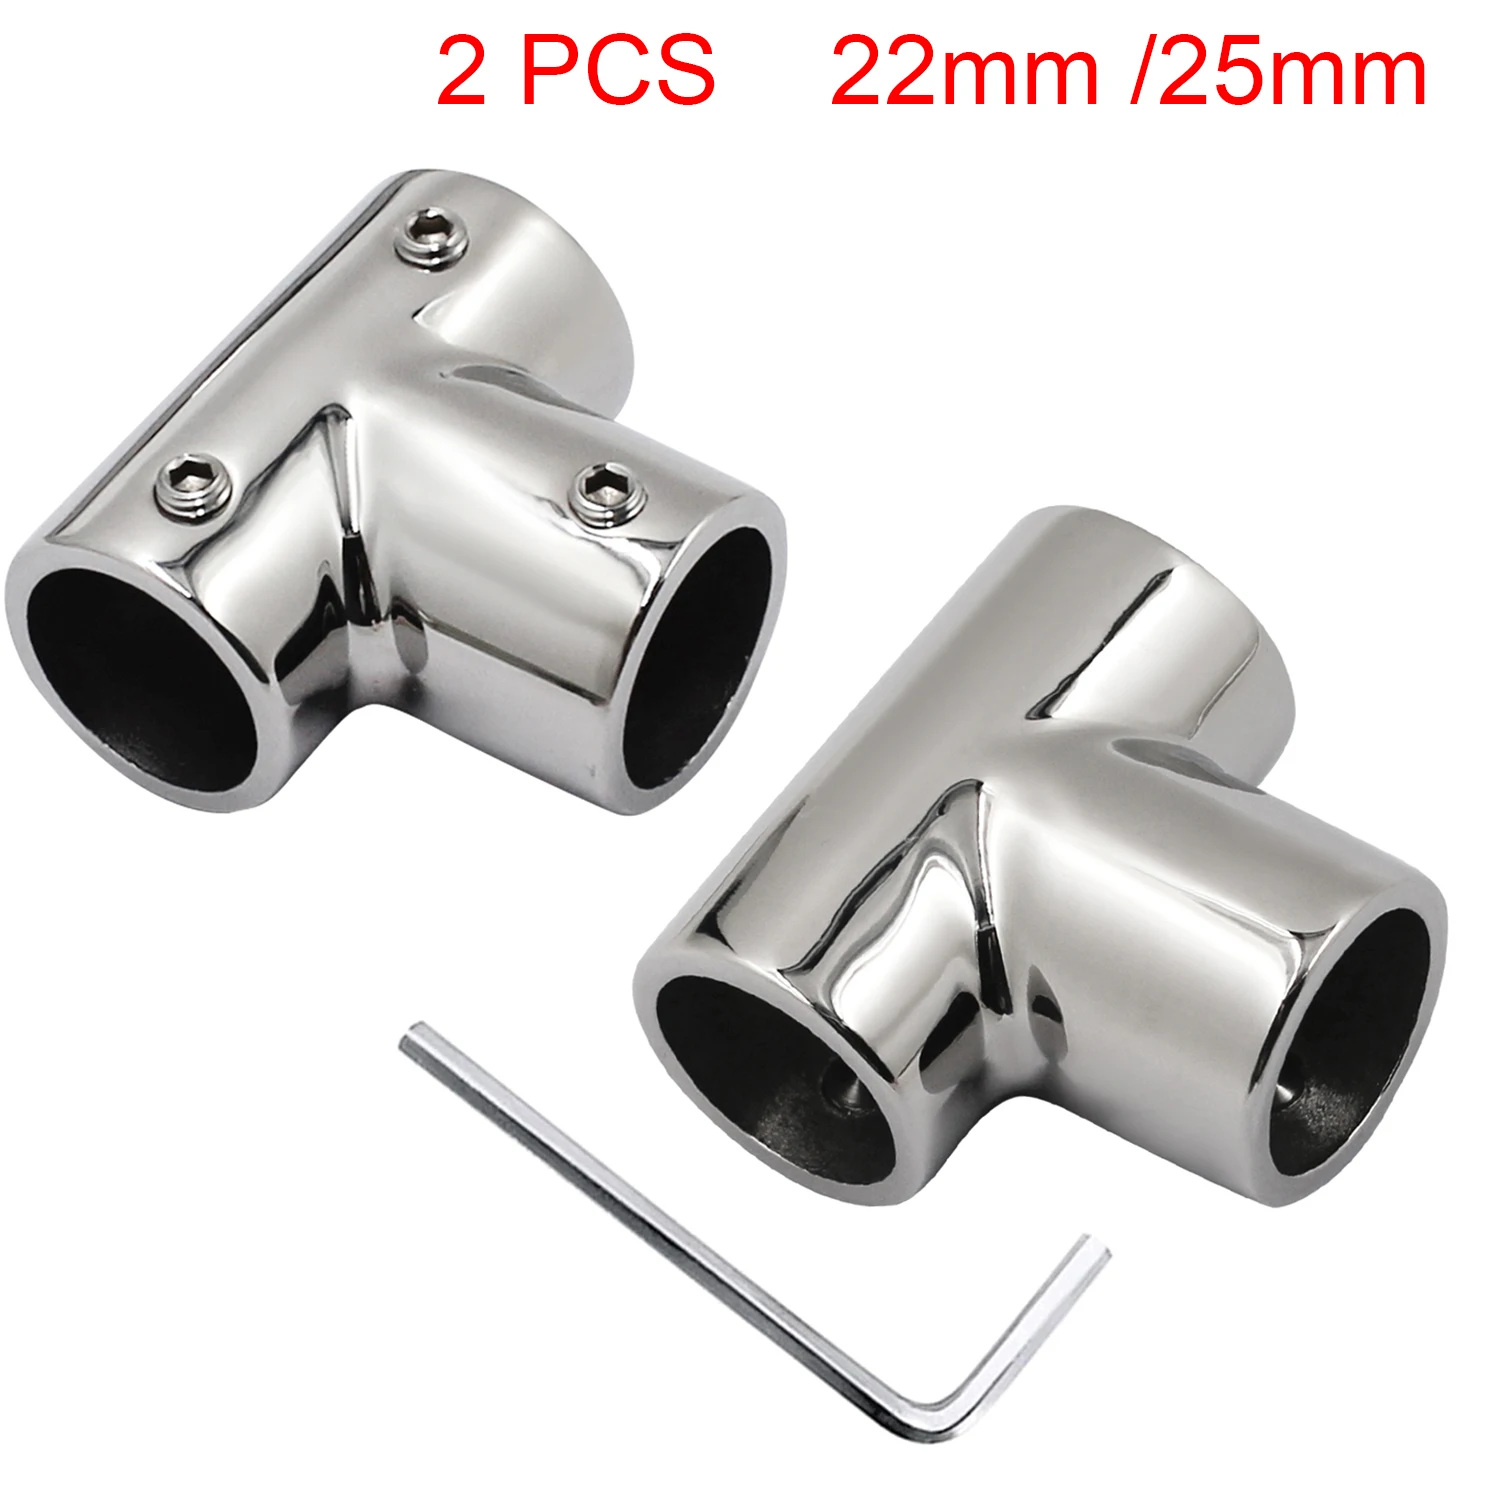 2 Pcs Stainless Steel 316 Marine Boat 3 Way Handrail Fitting 90° Deck Hand Rail Tee Joint Connector for 22mm/25mm Tube/Pipe bykski azieru g1 4 compress connector fitting joint for 3 8 9 5x12 7mm 10x13mm flexible tube au ft3 tn